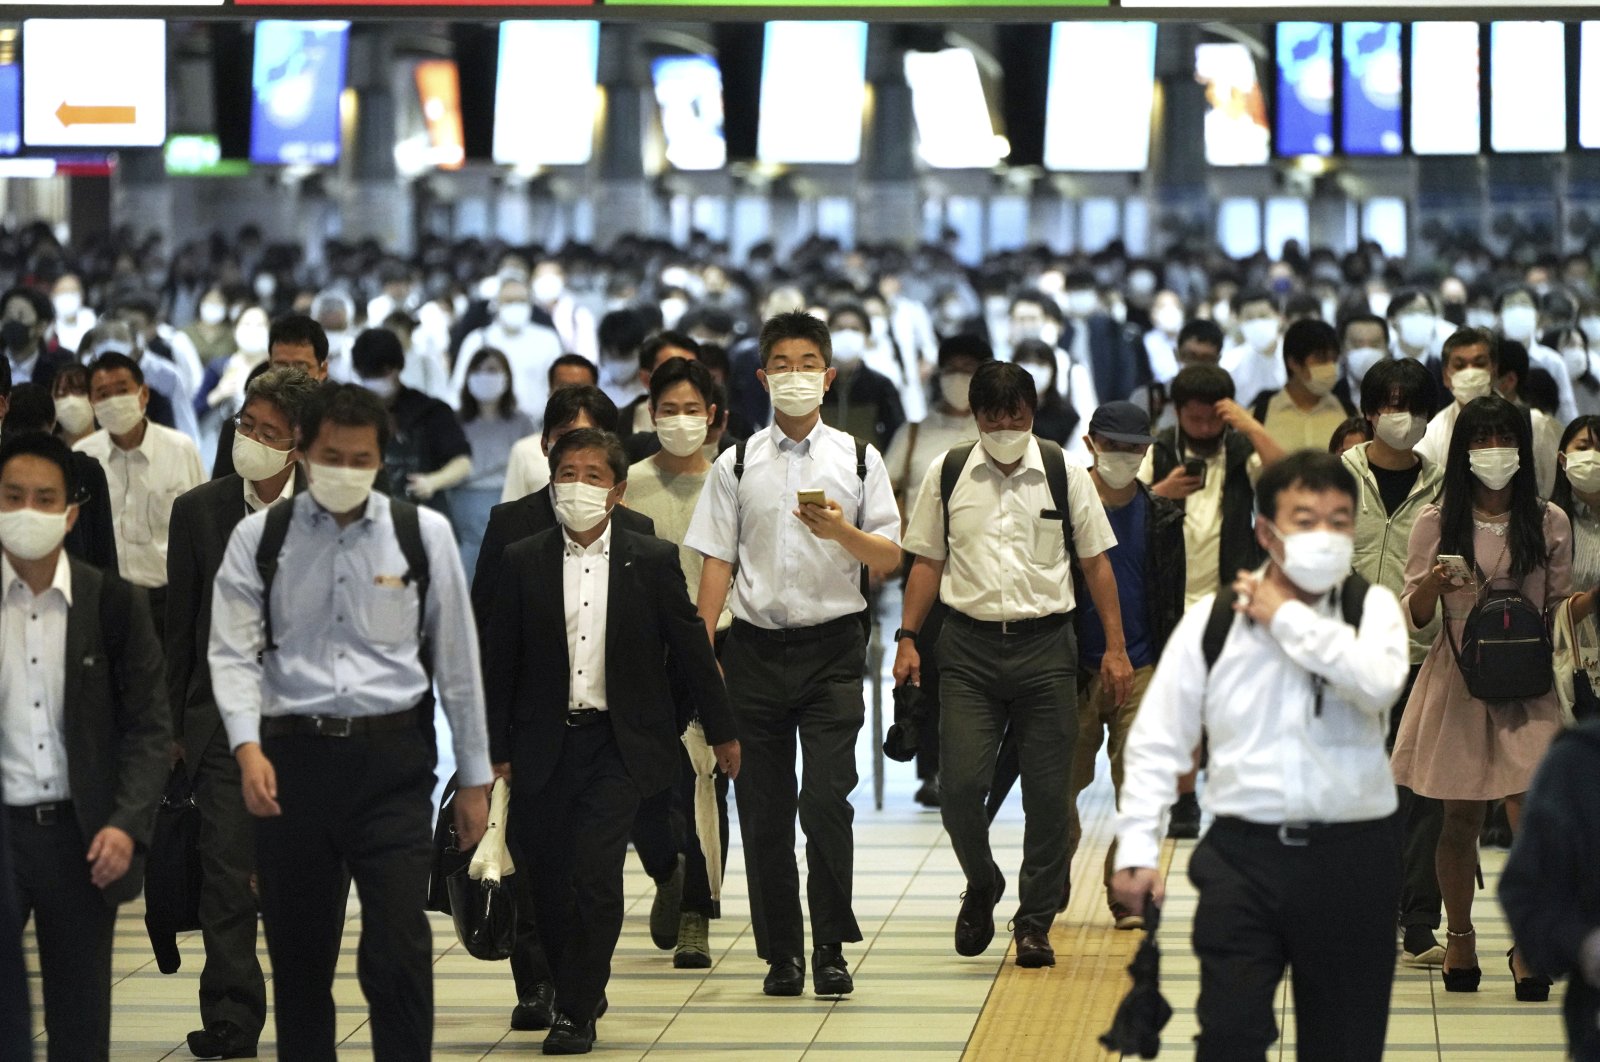 Commuters wearing face masks to help curb the spread of the coronavirus walk in a passageway during a rush hour at Shinagawa Station, in Tokyo, Japan, Oct. 1, 2021. (AP Photo)